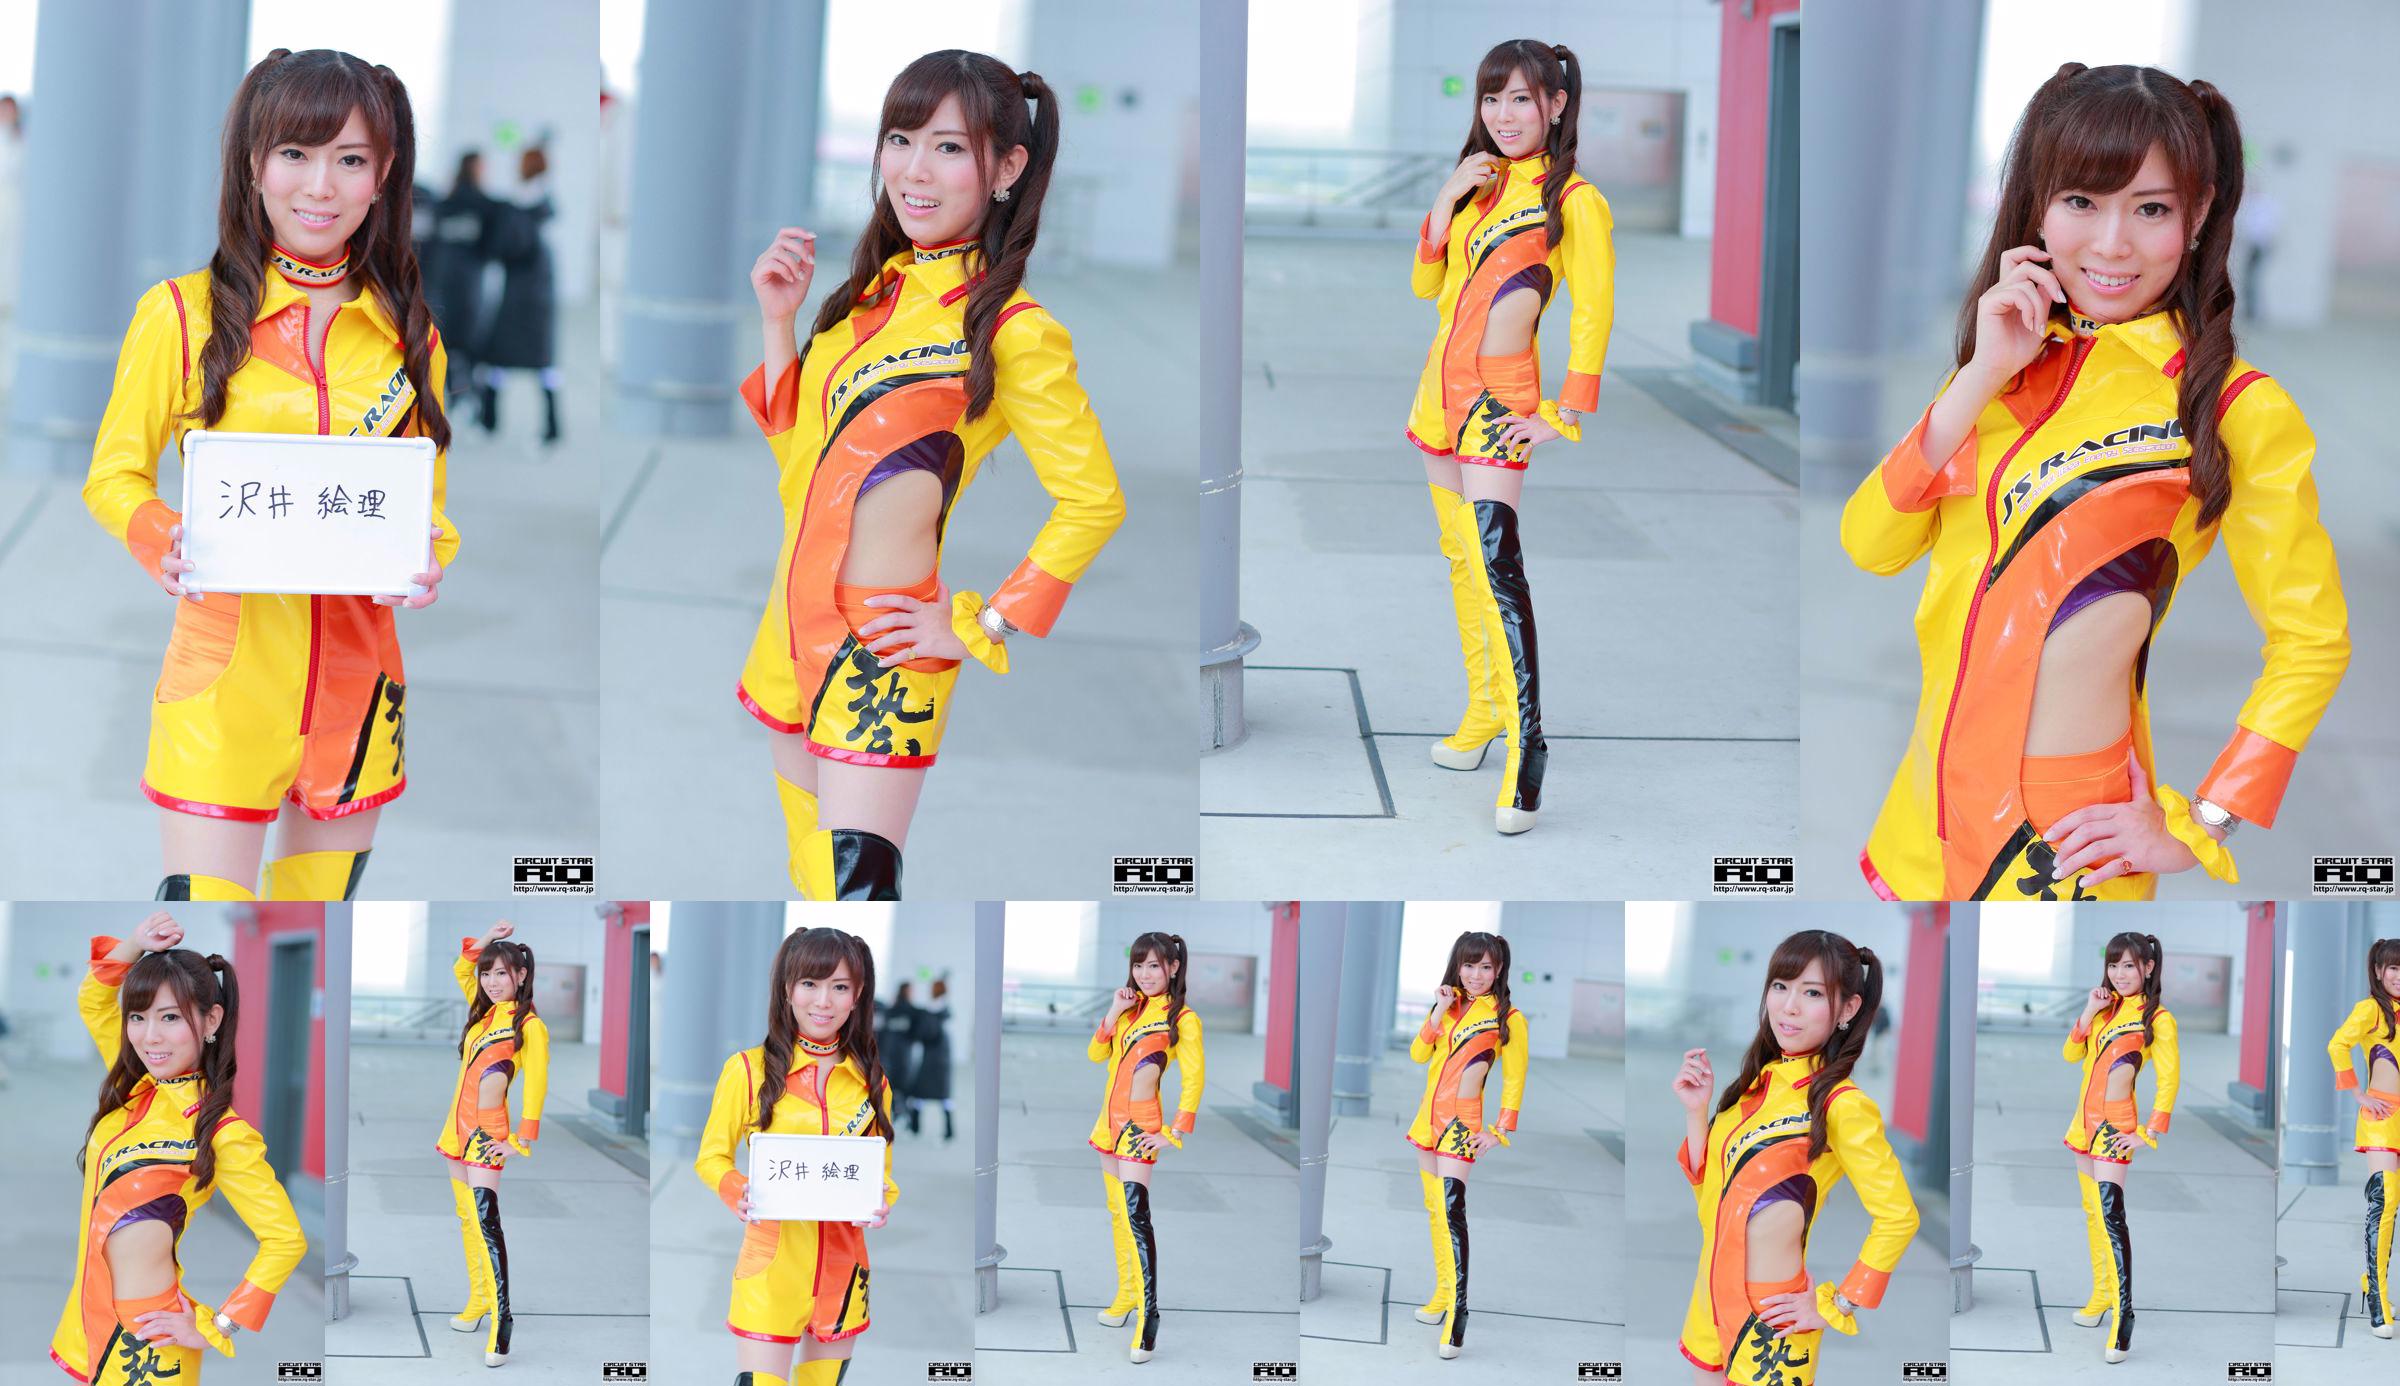 [RQ-STAR] NO 00742 Chihiro Ando Race Queen Race Queen No.f67204 Page 12